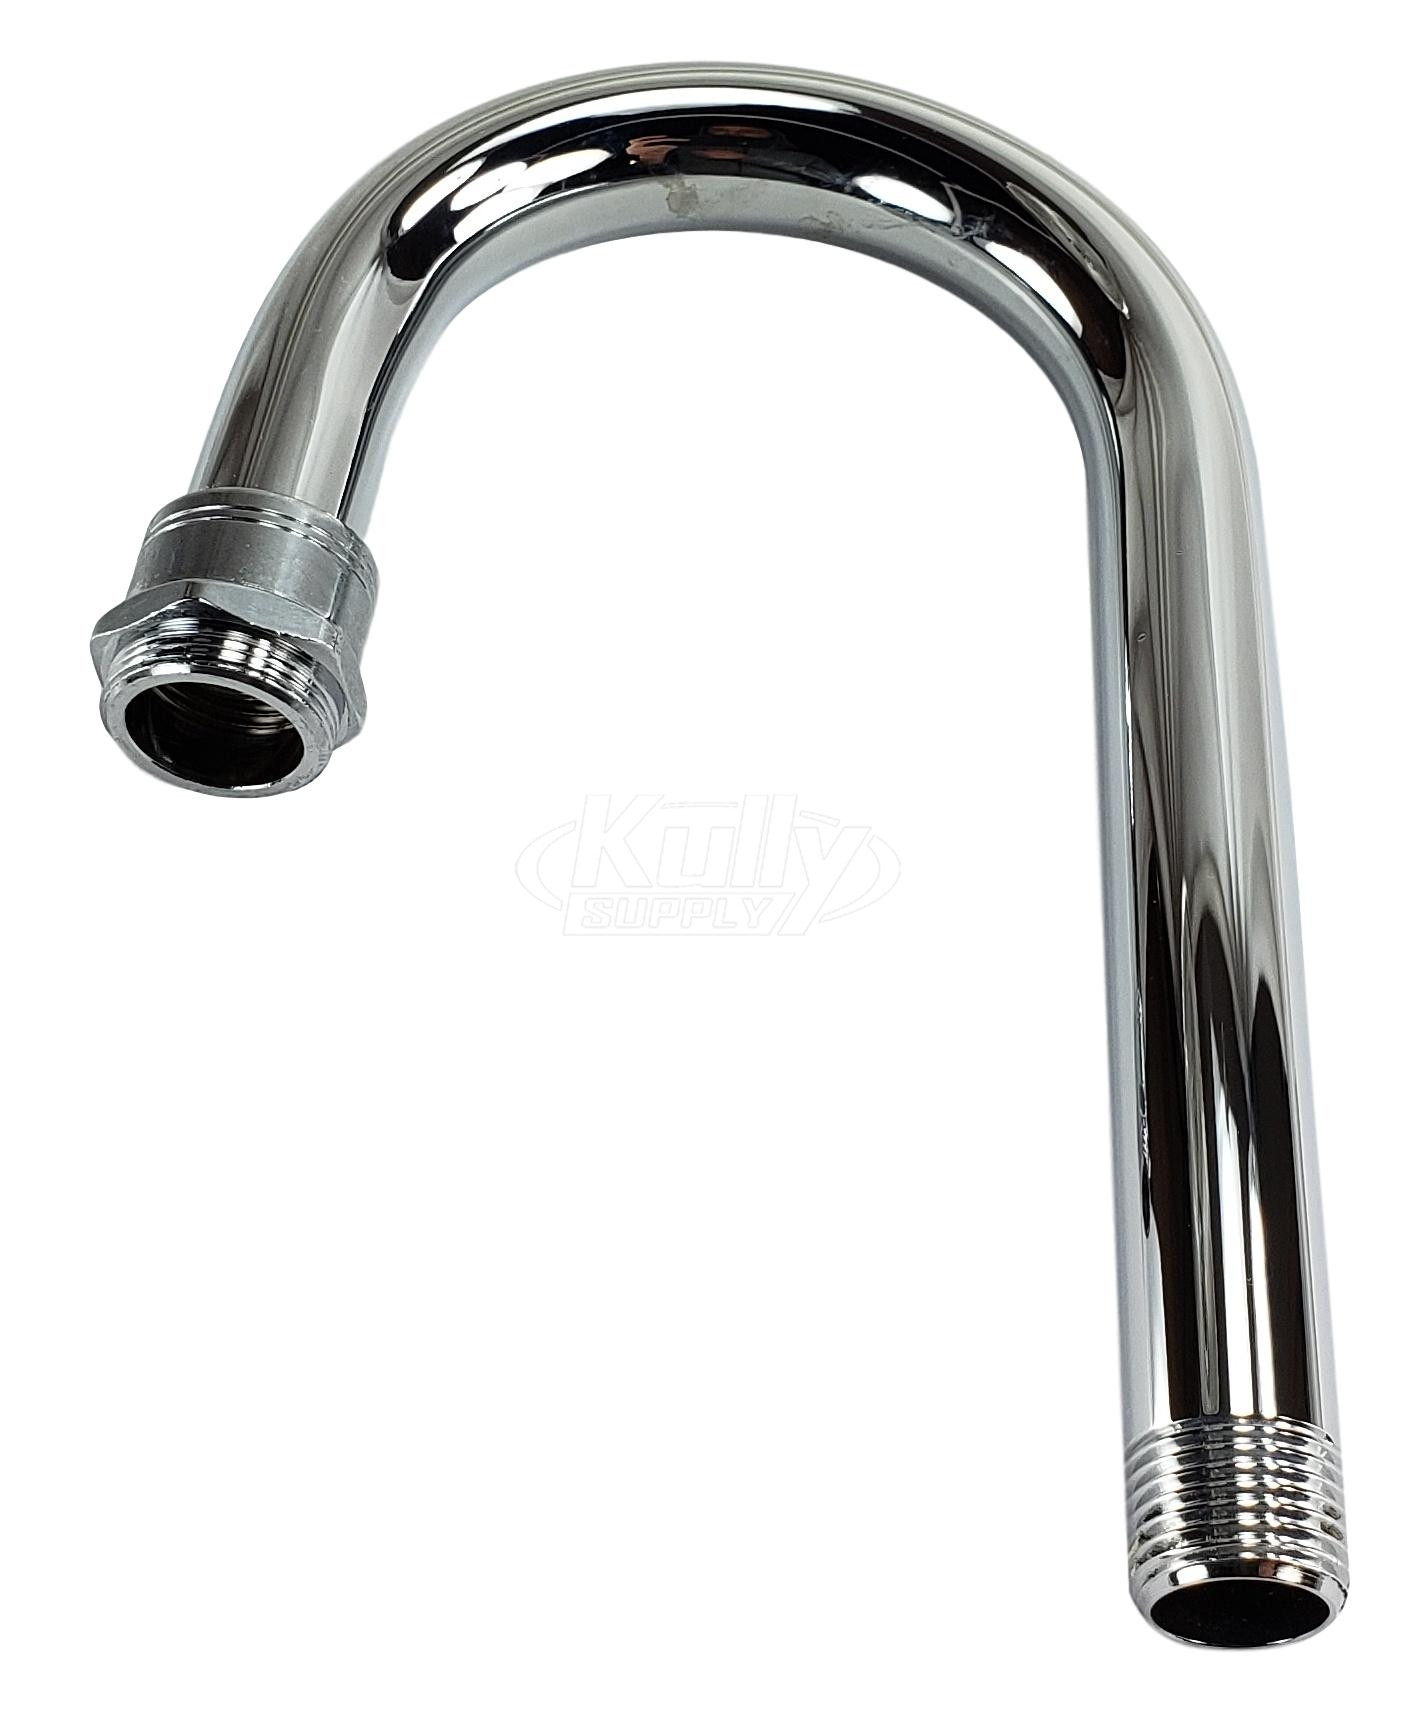 Chicago 225-002KJKABCP Spout w/Outlet Adapter 13/16-24 Male